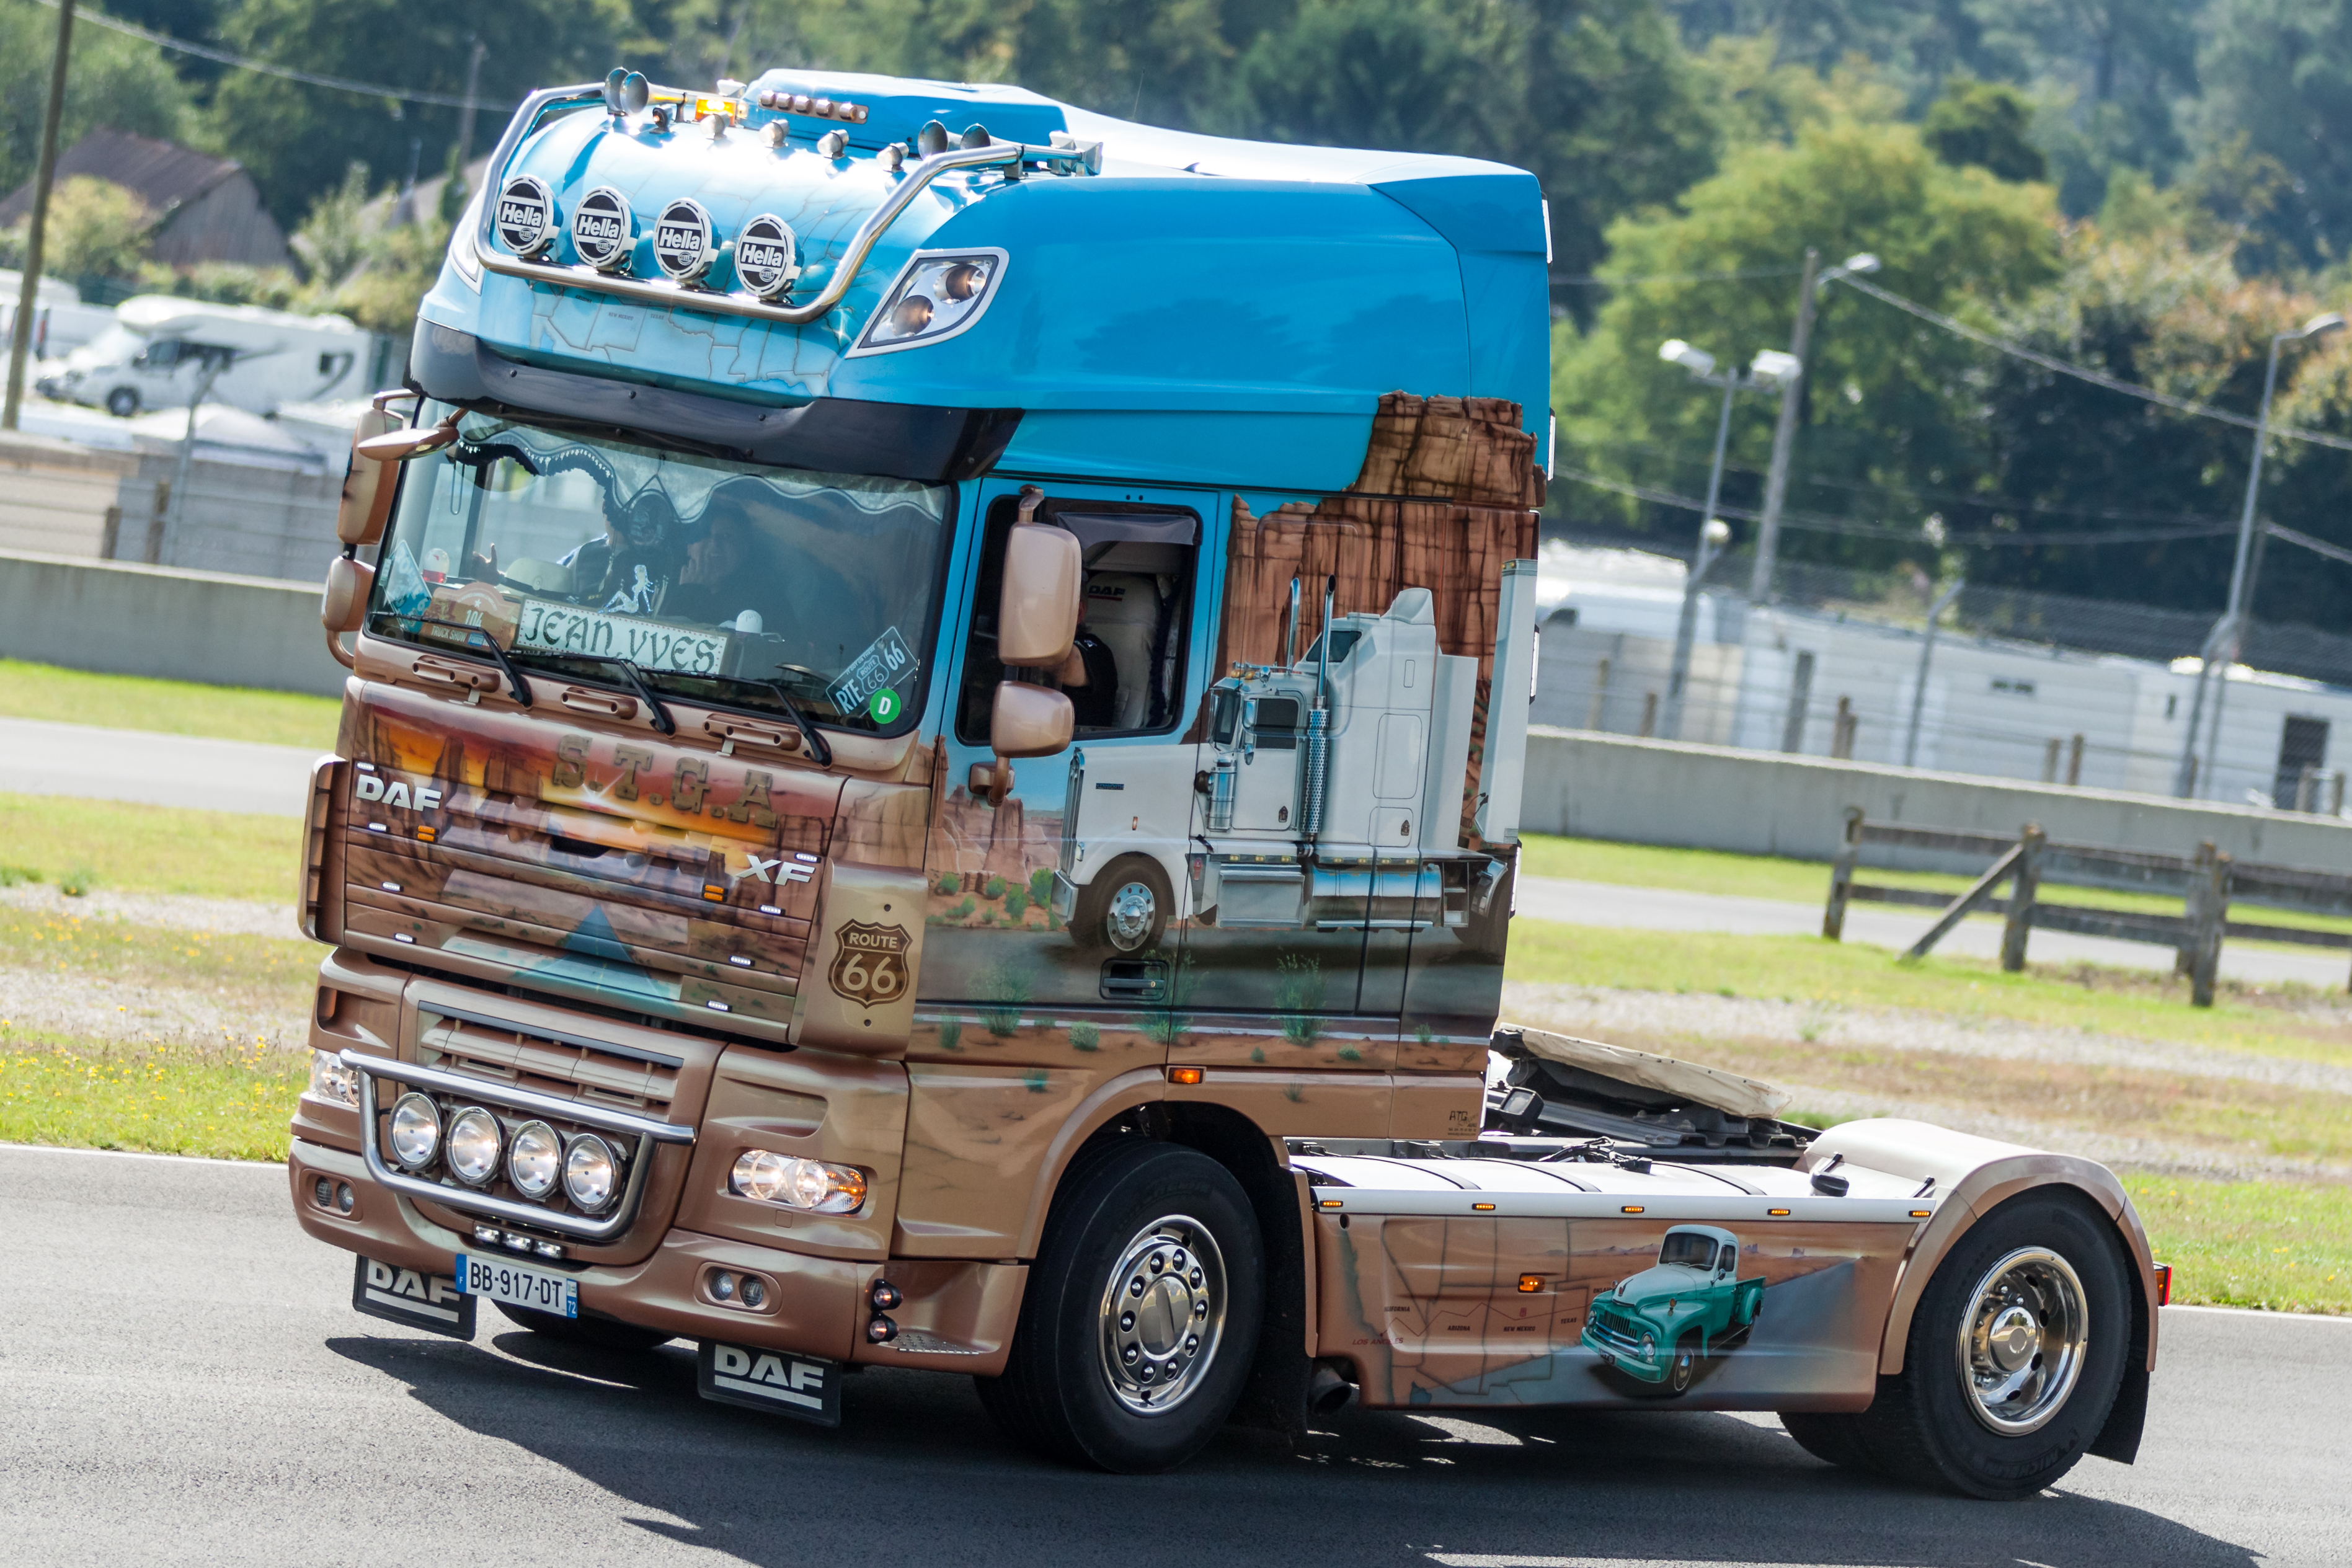 Daf Truck Pictures High Resolution Photo Galleries To